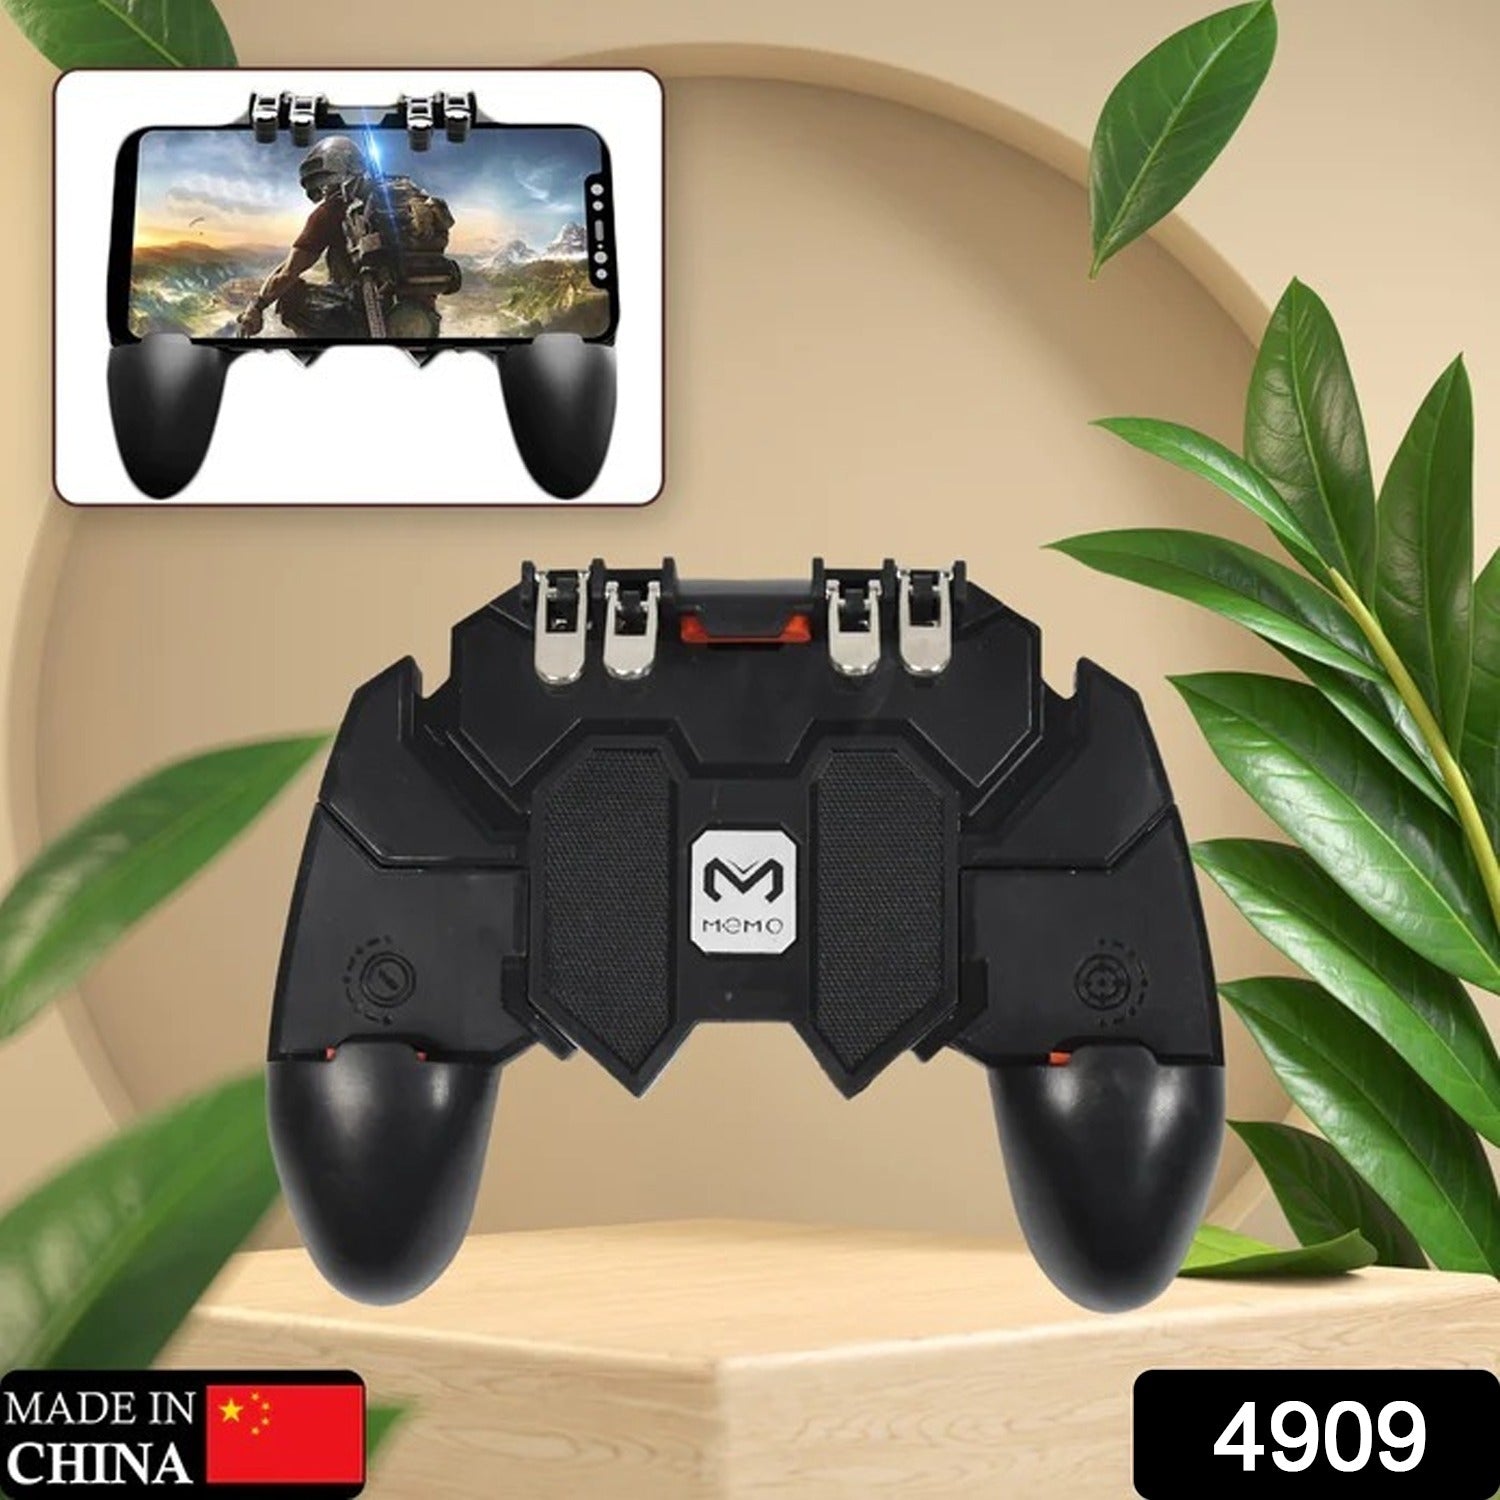 4909 Portable Mobile Game Pad Controller with 4 Triggers For All Games Use of Survival Mobile Controller DeoDap